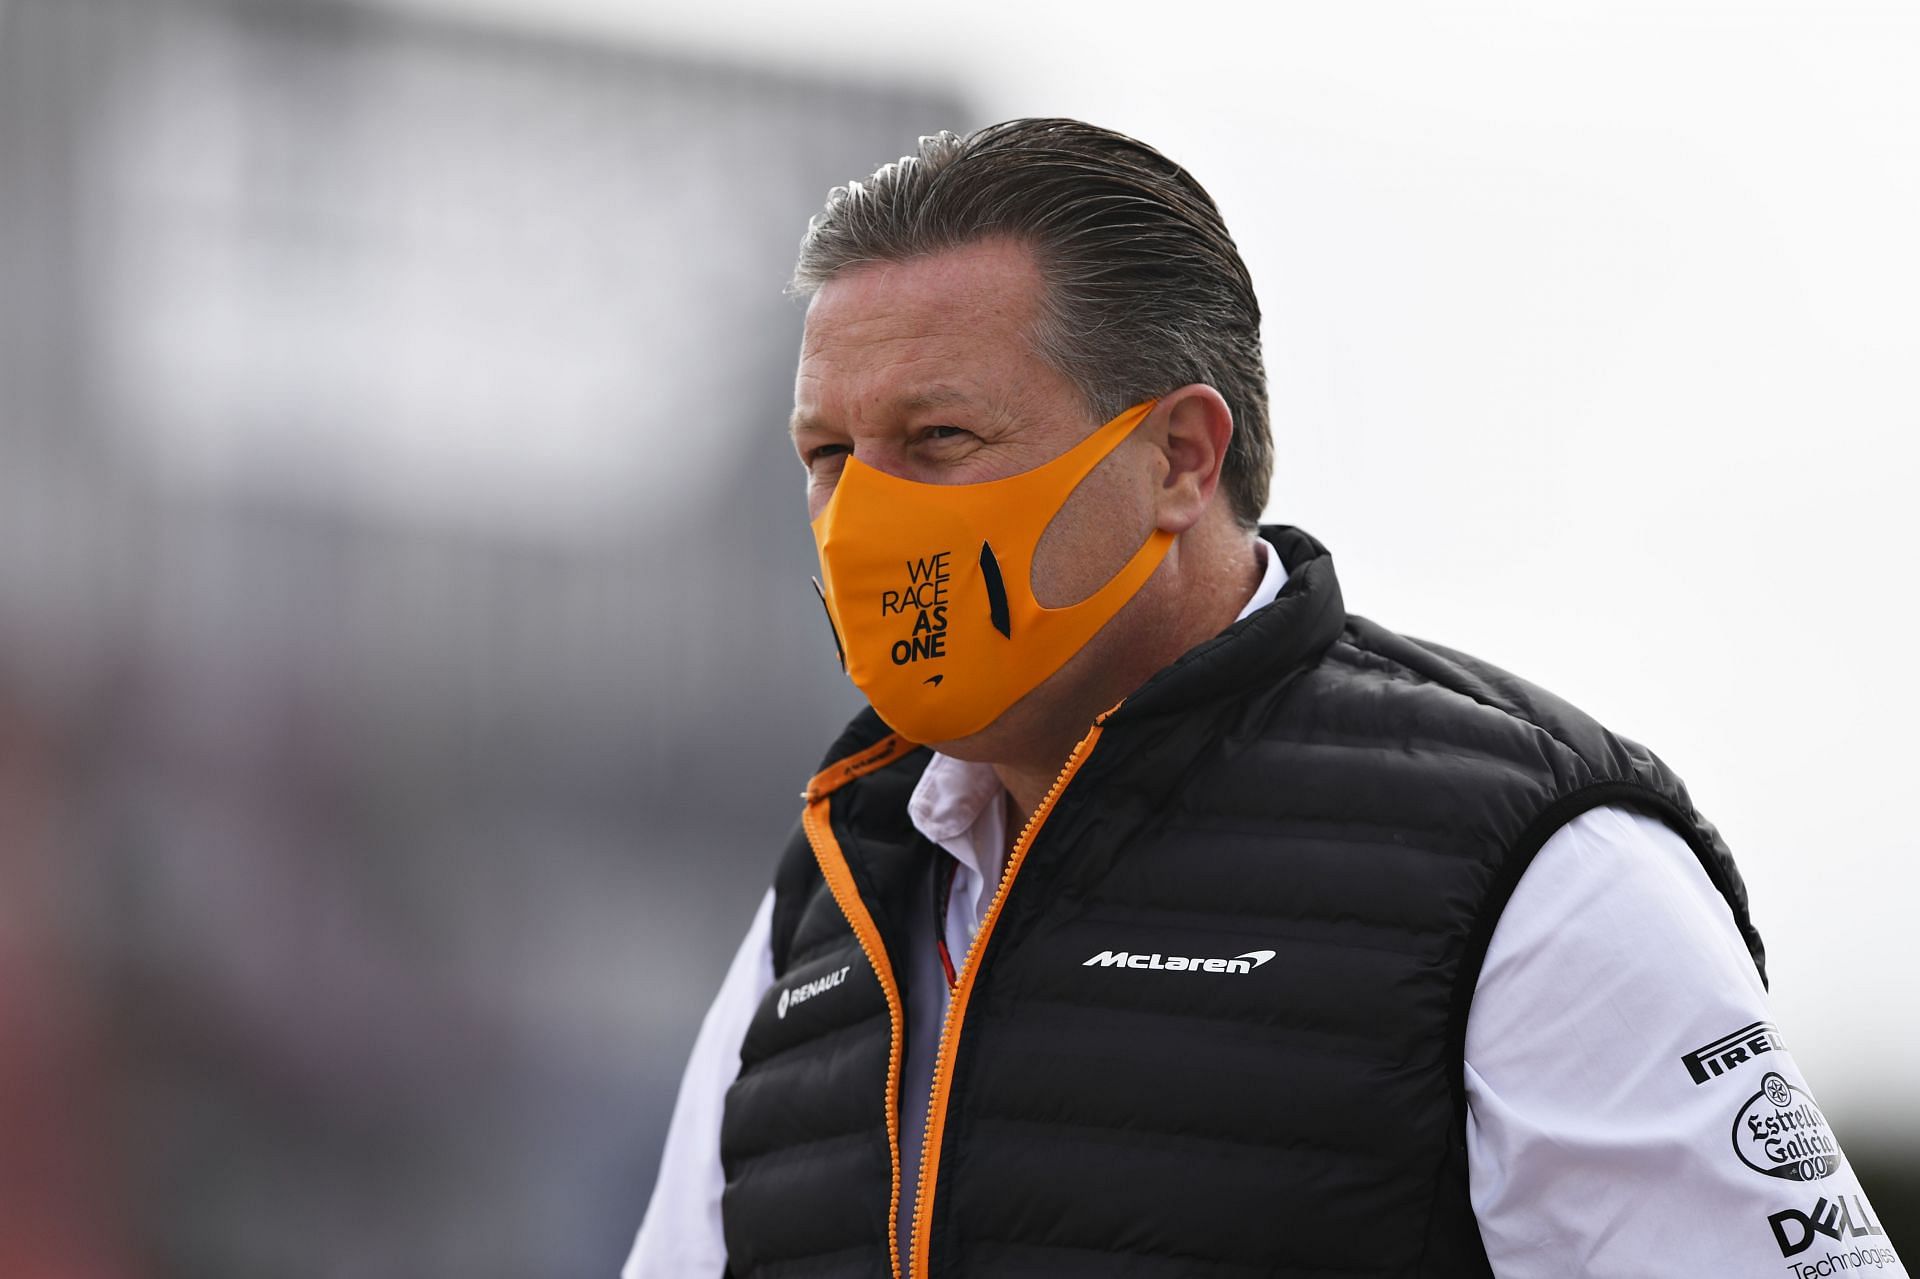 McLaren CEO Zak Brown in the F1 paddock. (Photo by Rudy Carezzevoli/Getty Images)